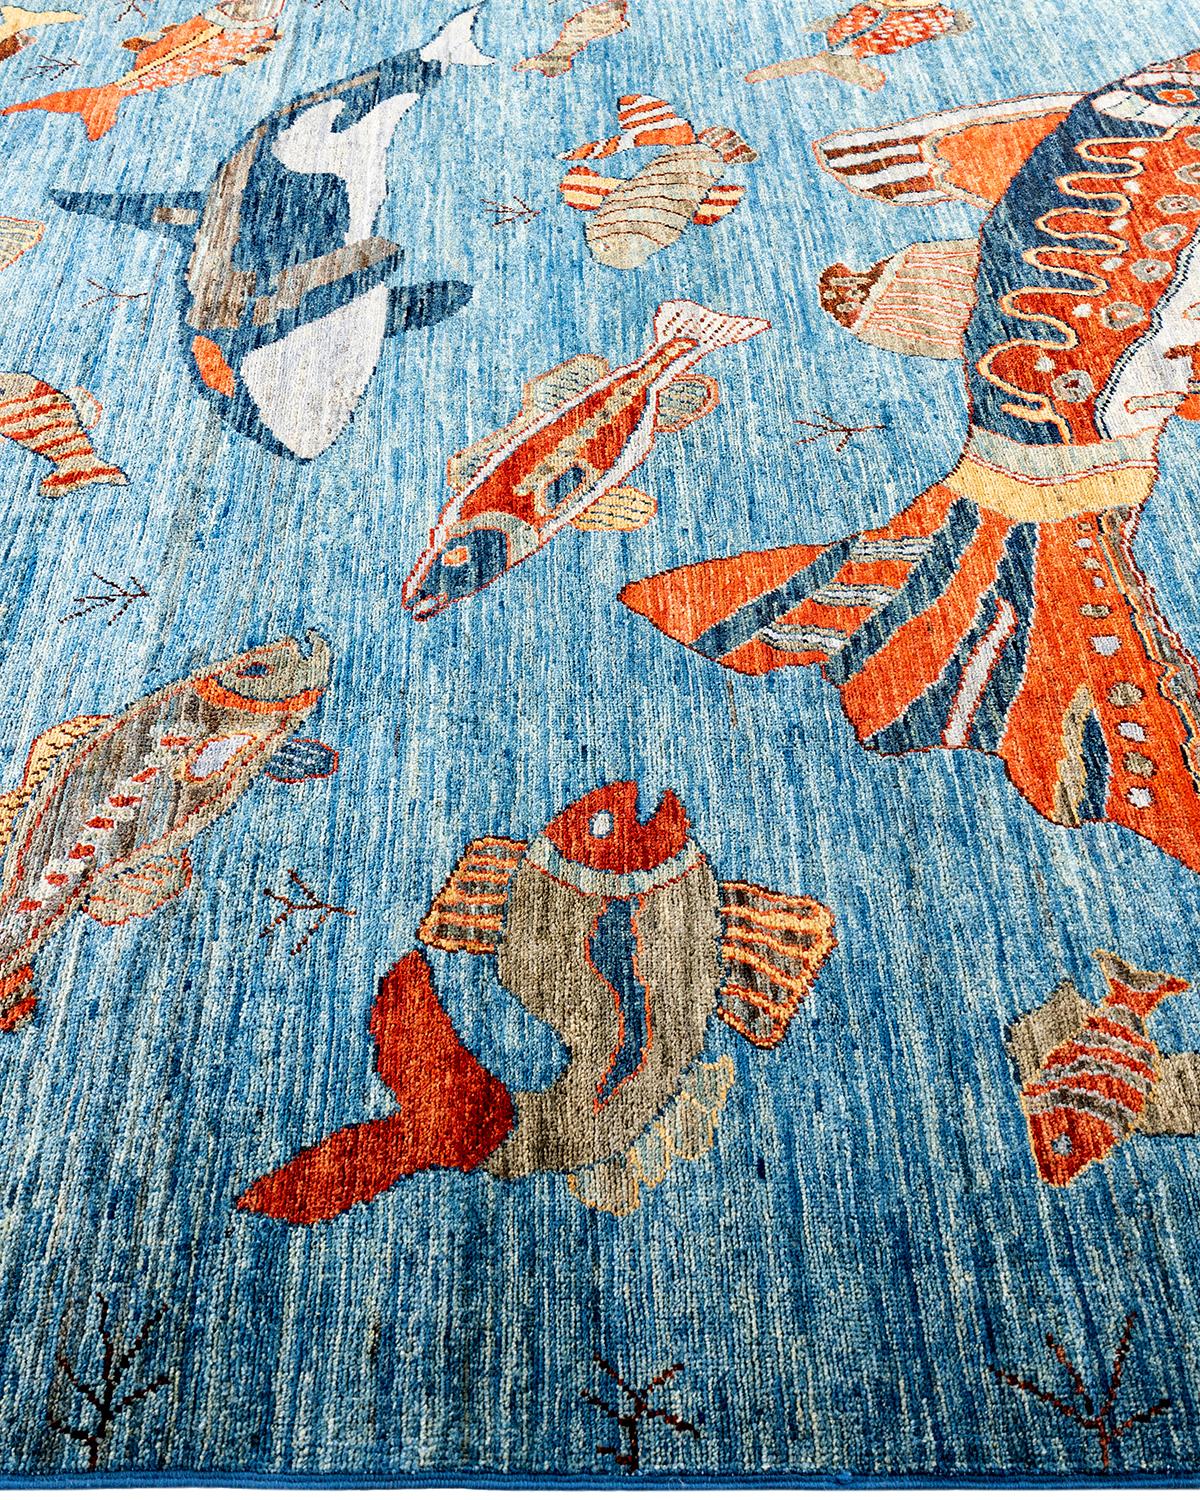  Traditional Serapi Hand Knotted Wool Light Blue Area Rug In New Condition For Sale In Norwalk, CT